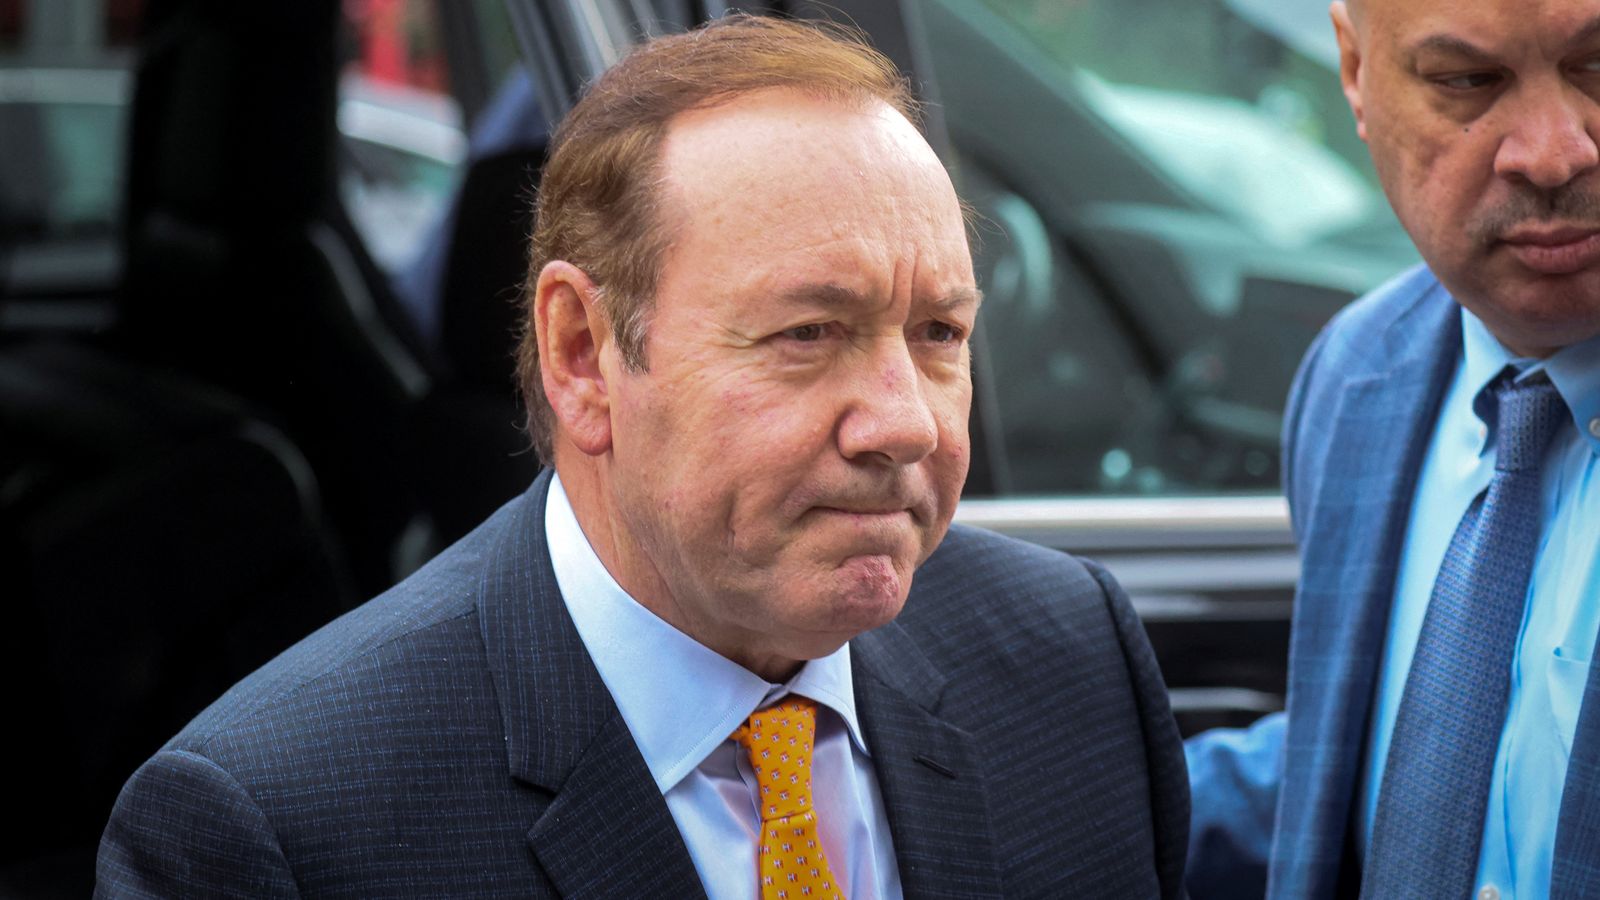 Tearful Spacey says he was 'shocked' and 'frightened' by claims he made unwanted sexual advance on young actor